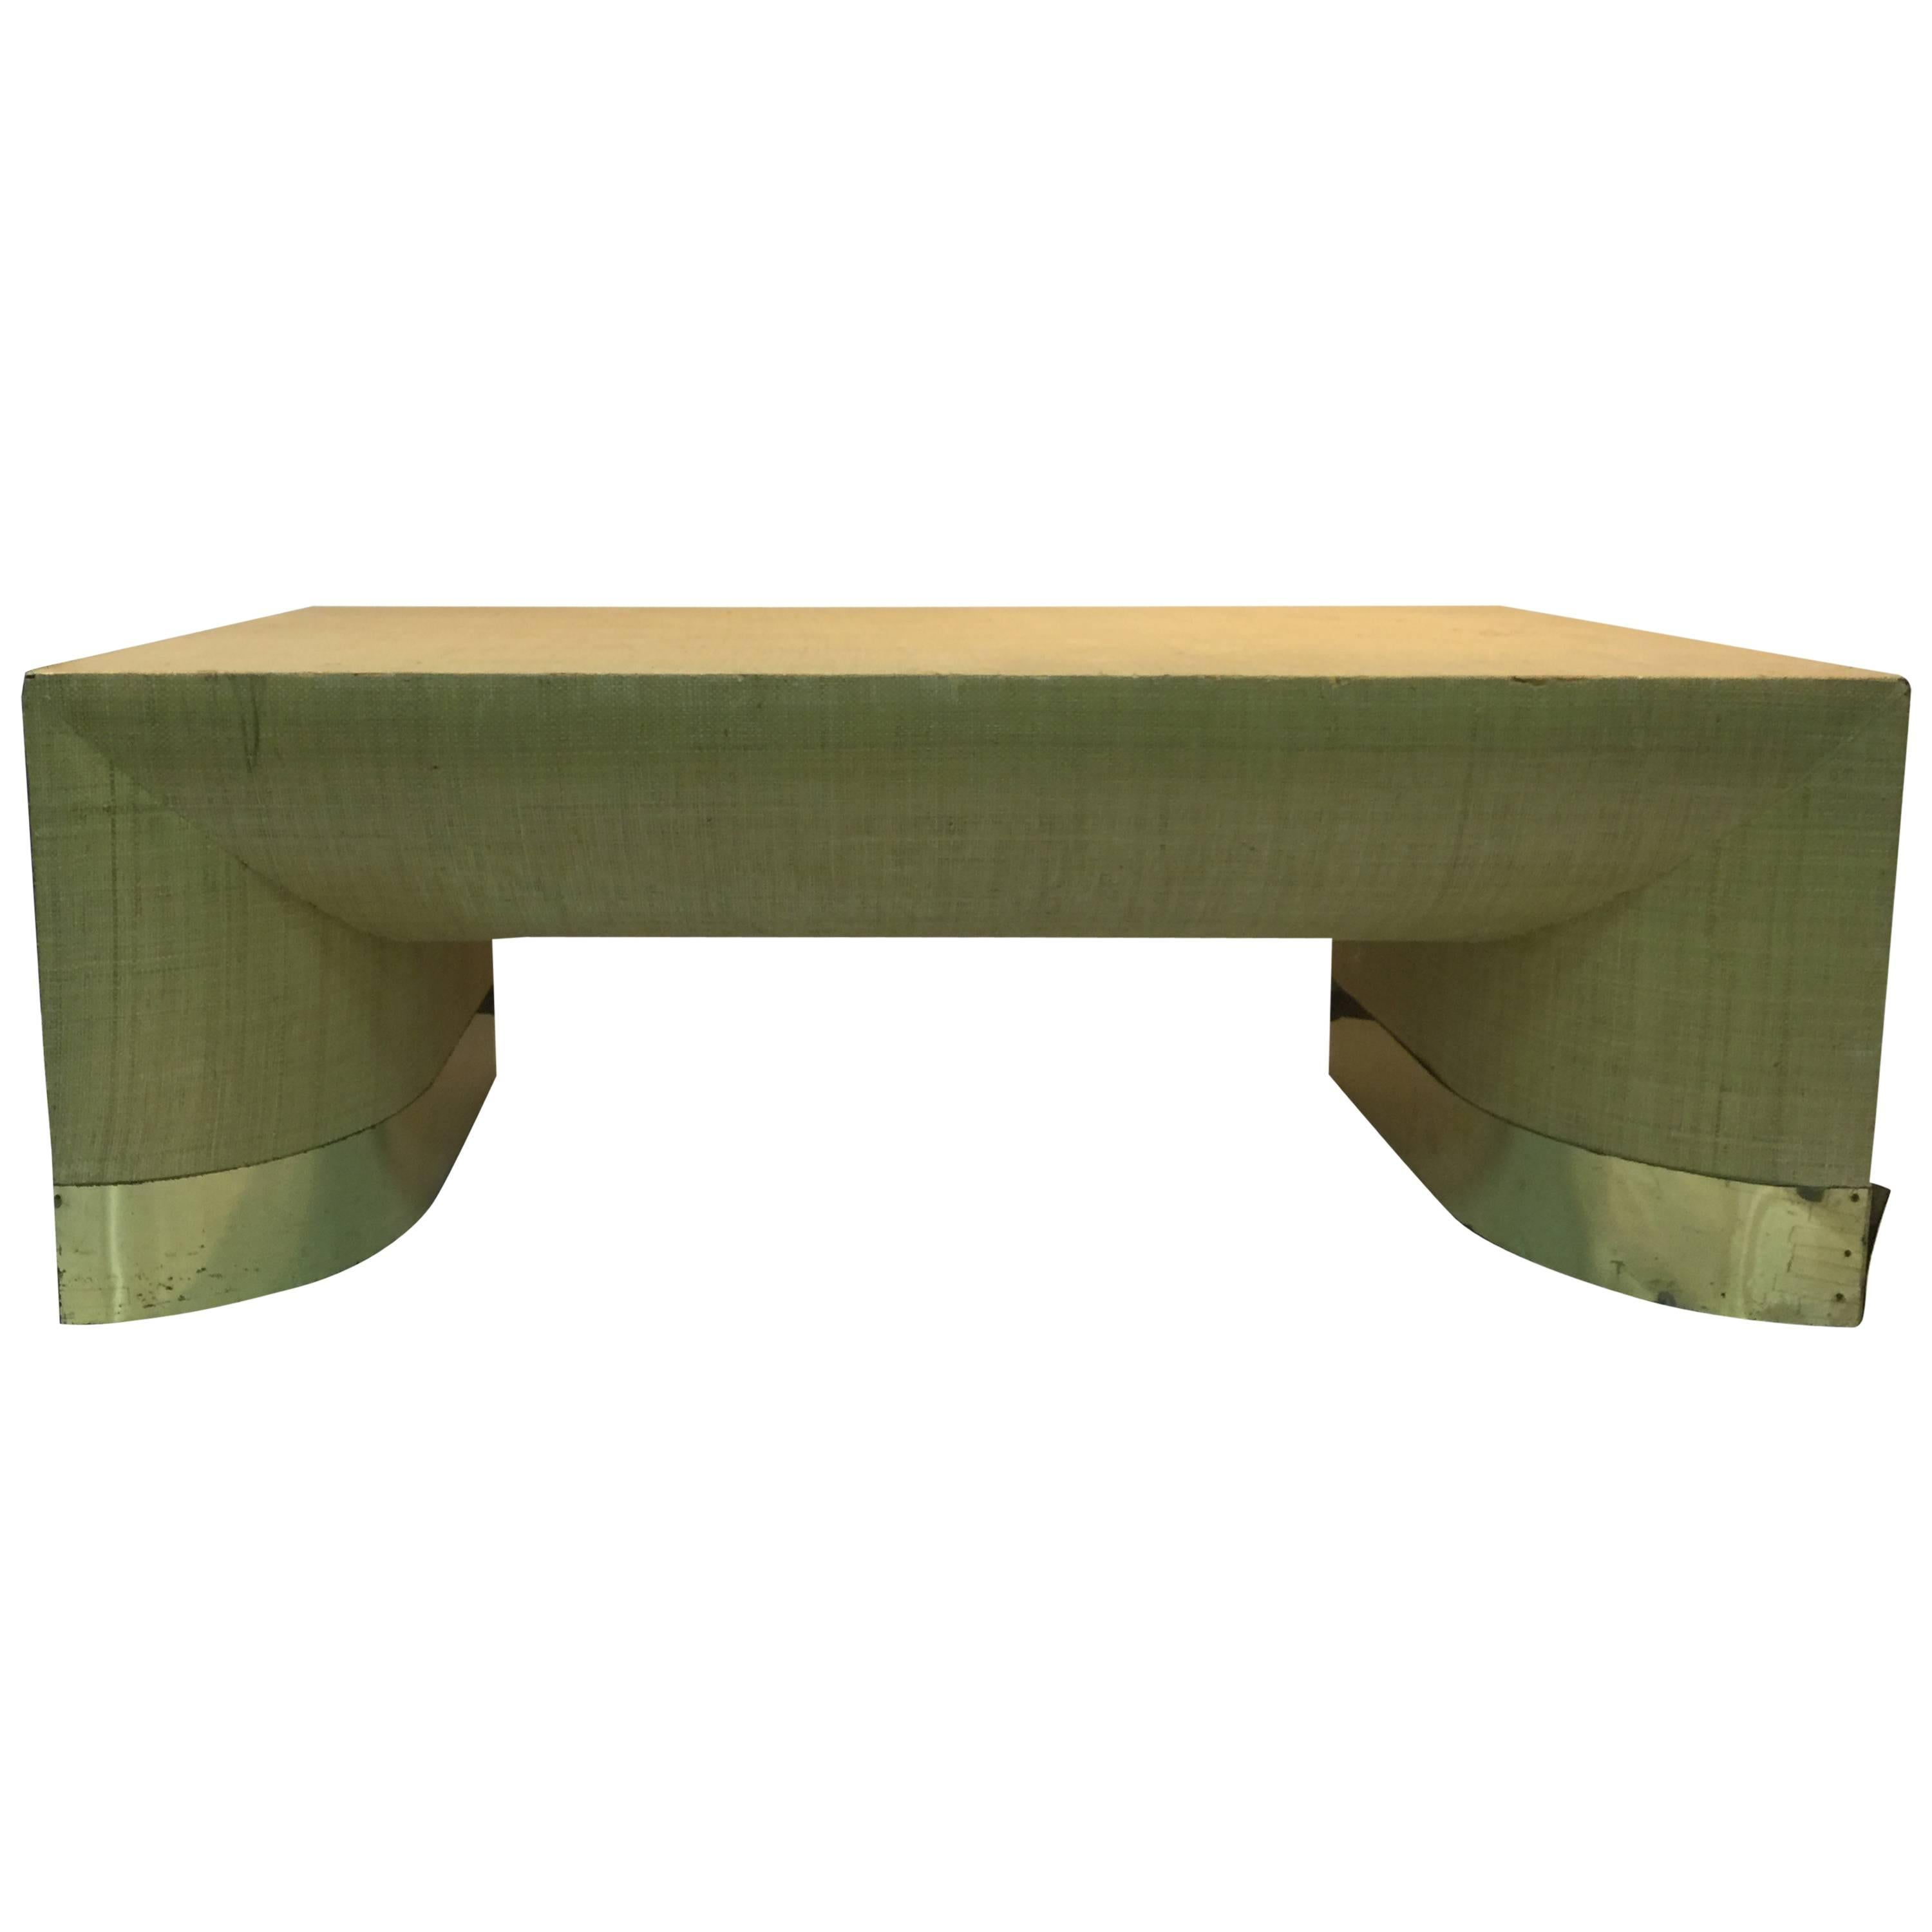 Substantial Grasscloth Coffee Table with Brass Banding For Sale